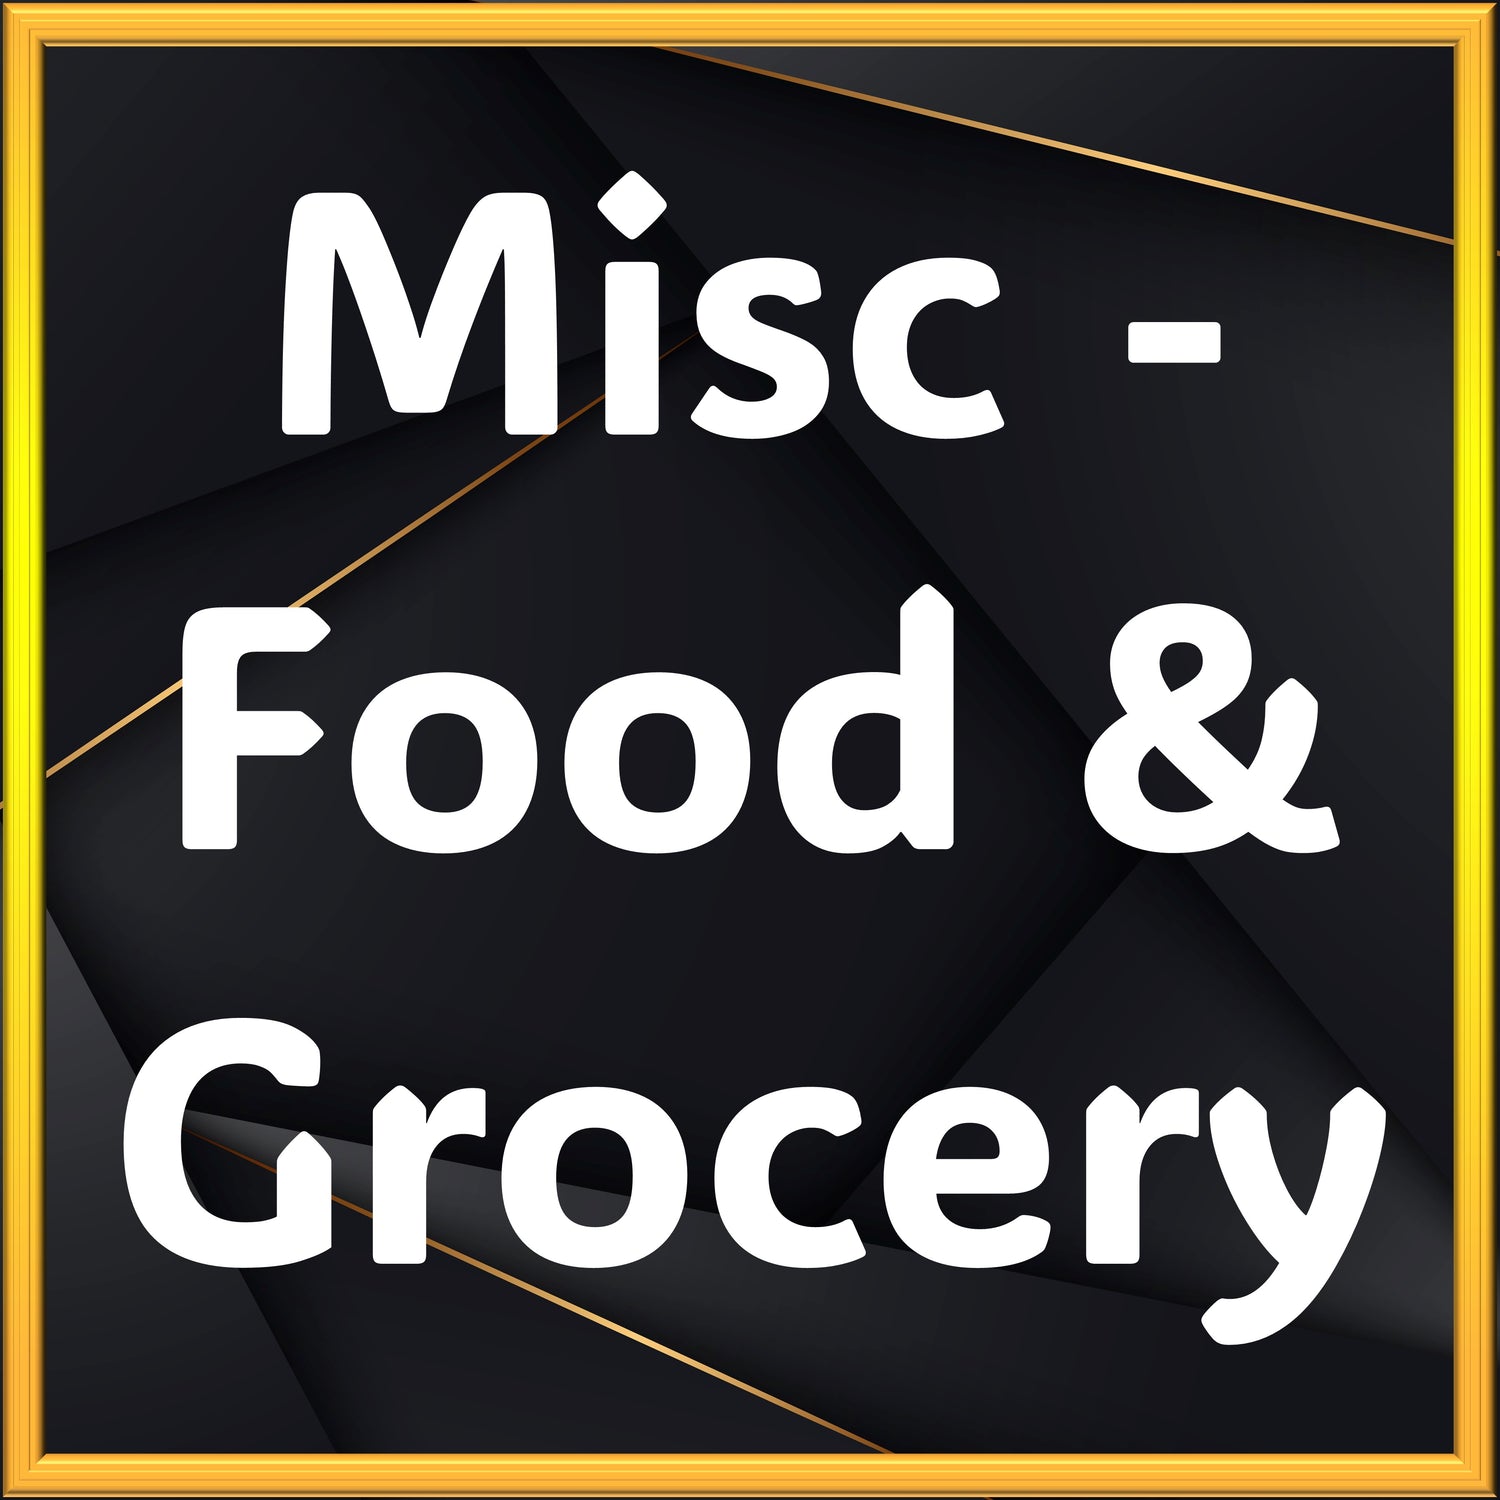 Misc - Food & Grocery